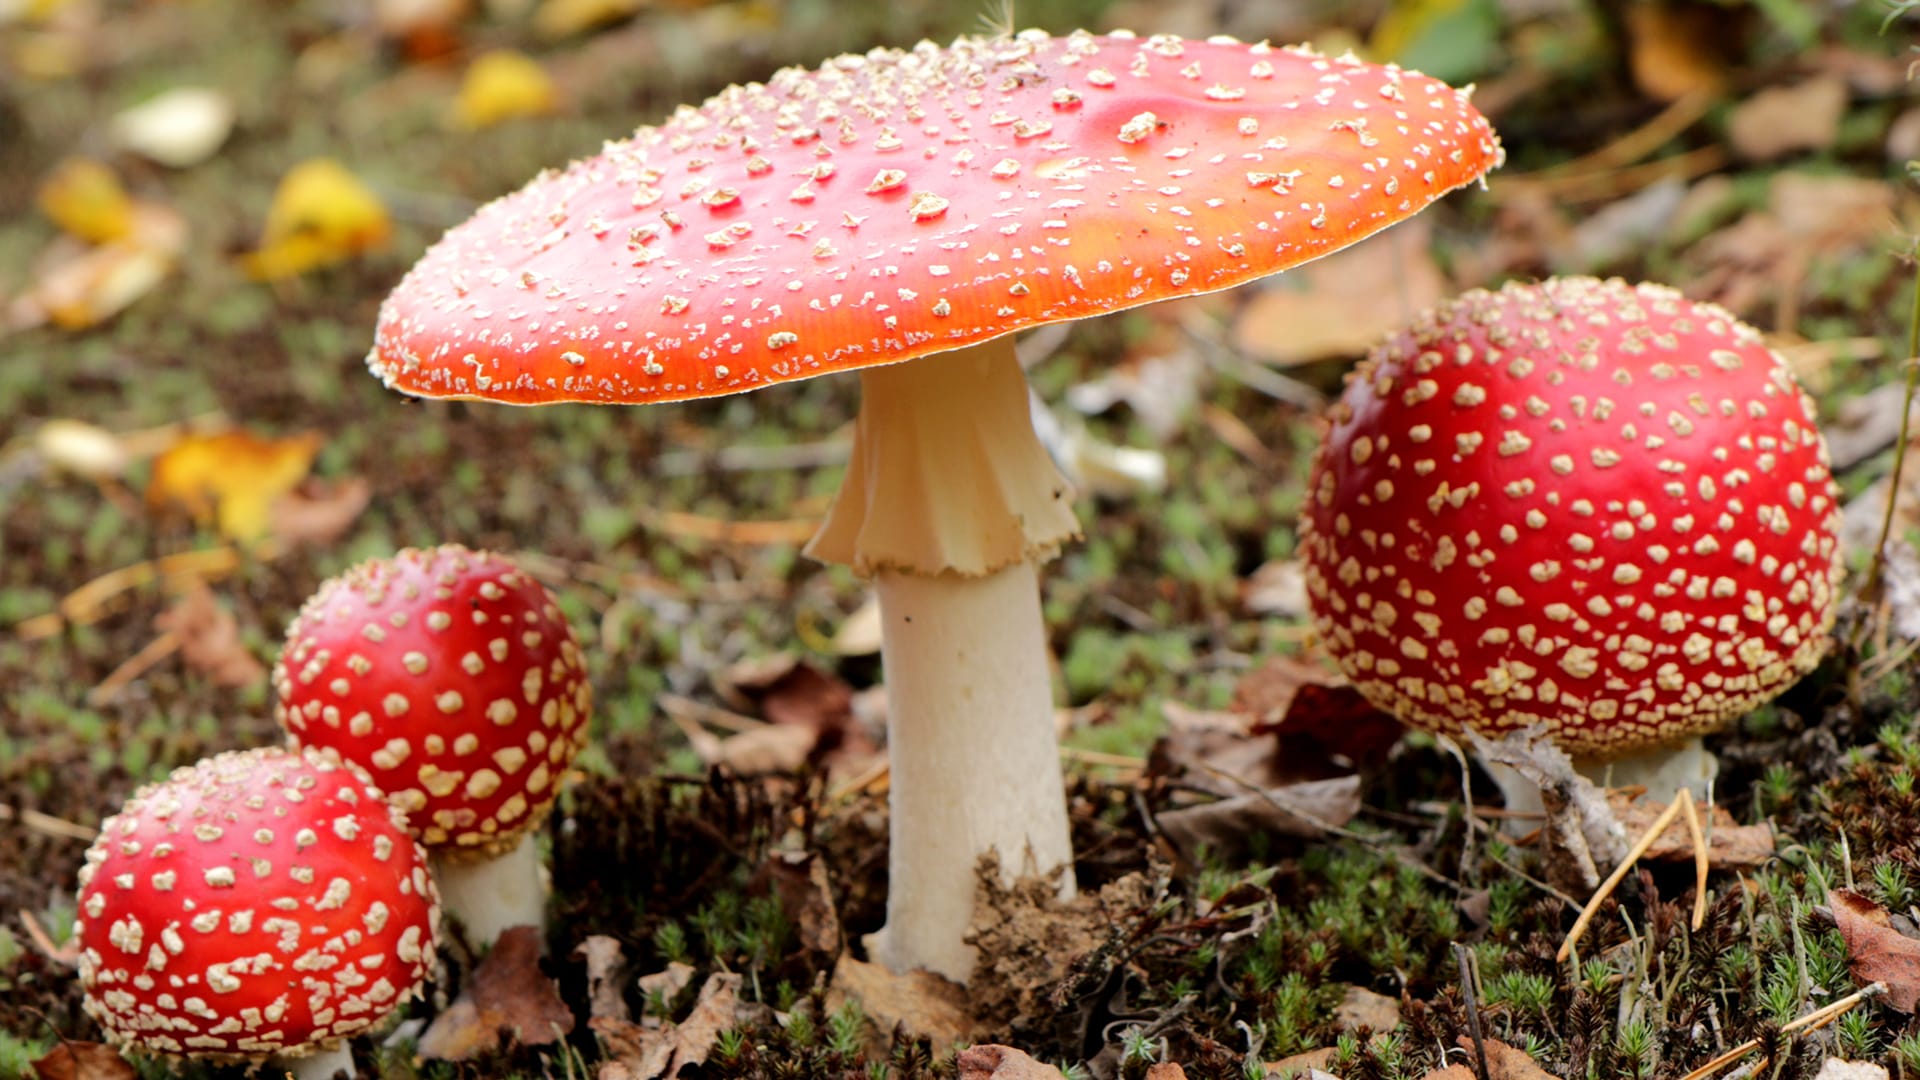 How can you tell if a mushroom is poisonous?